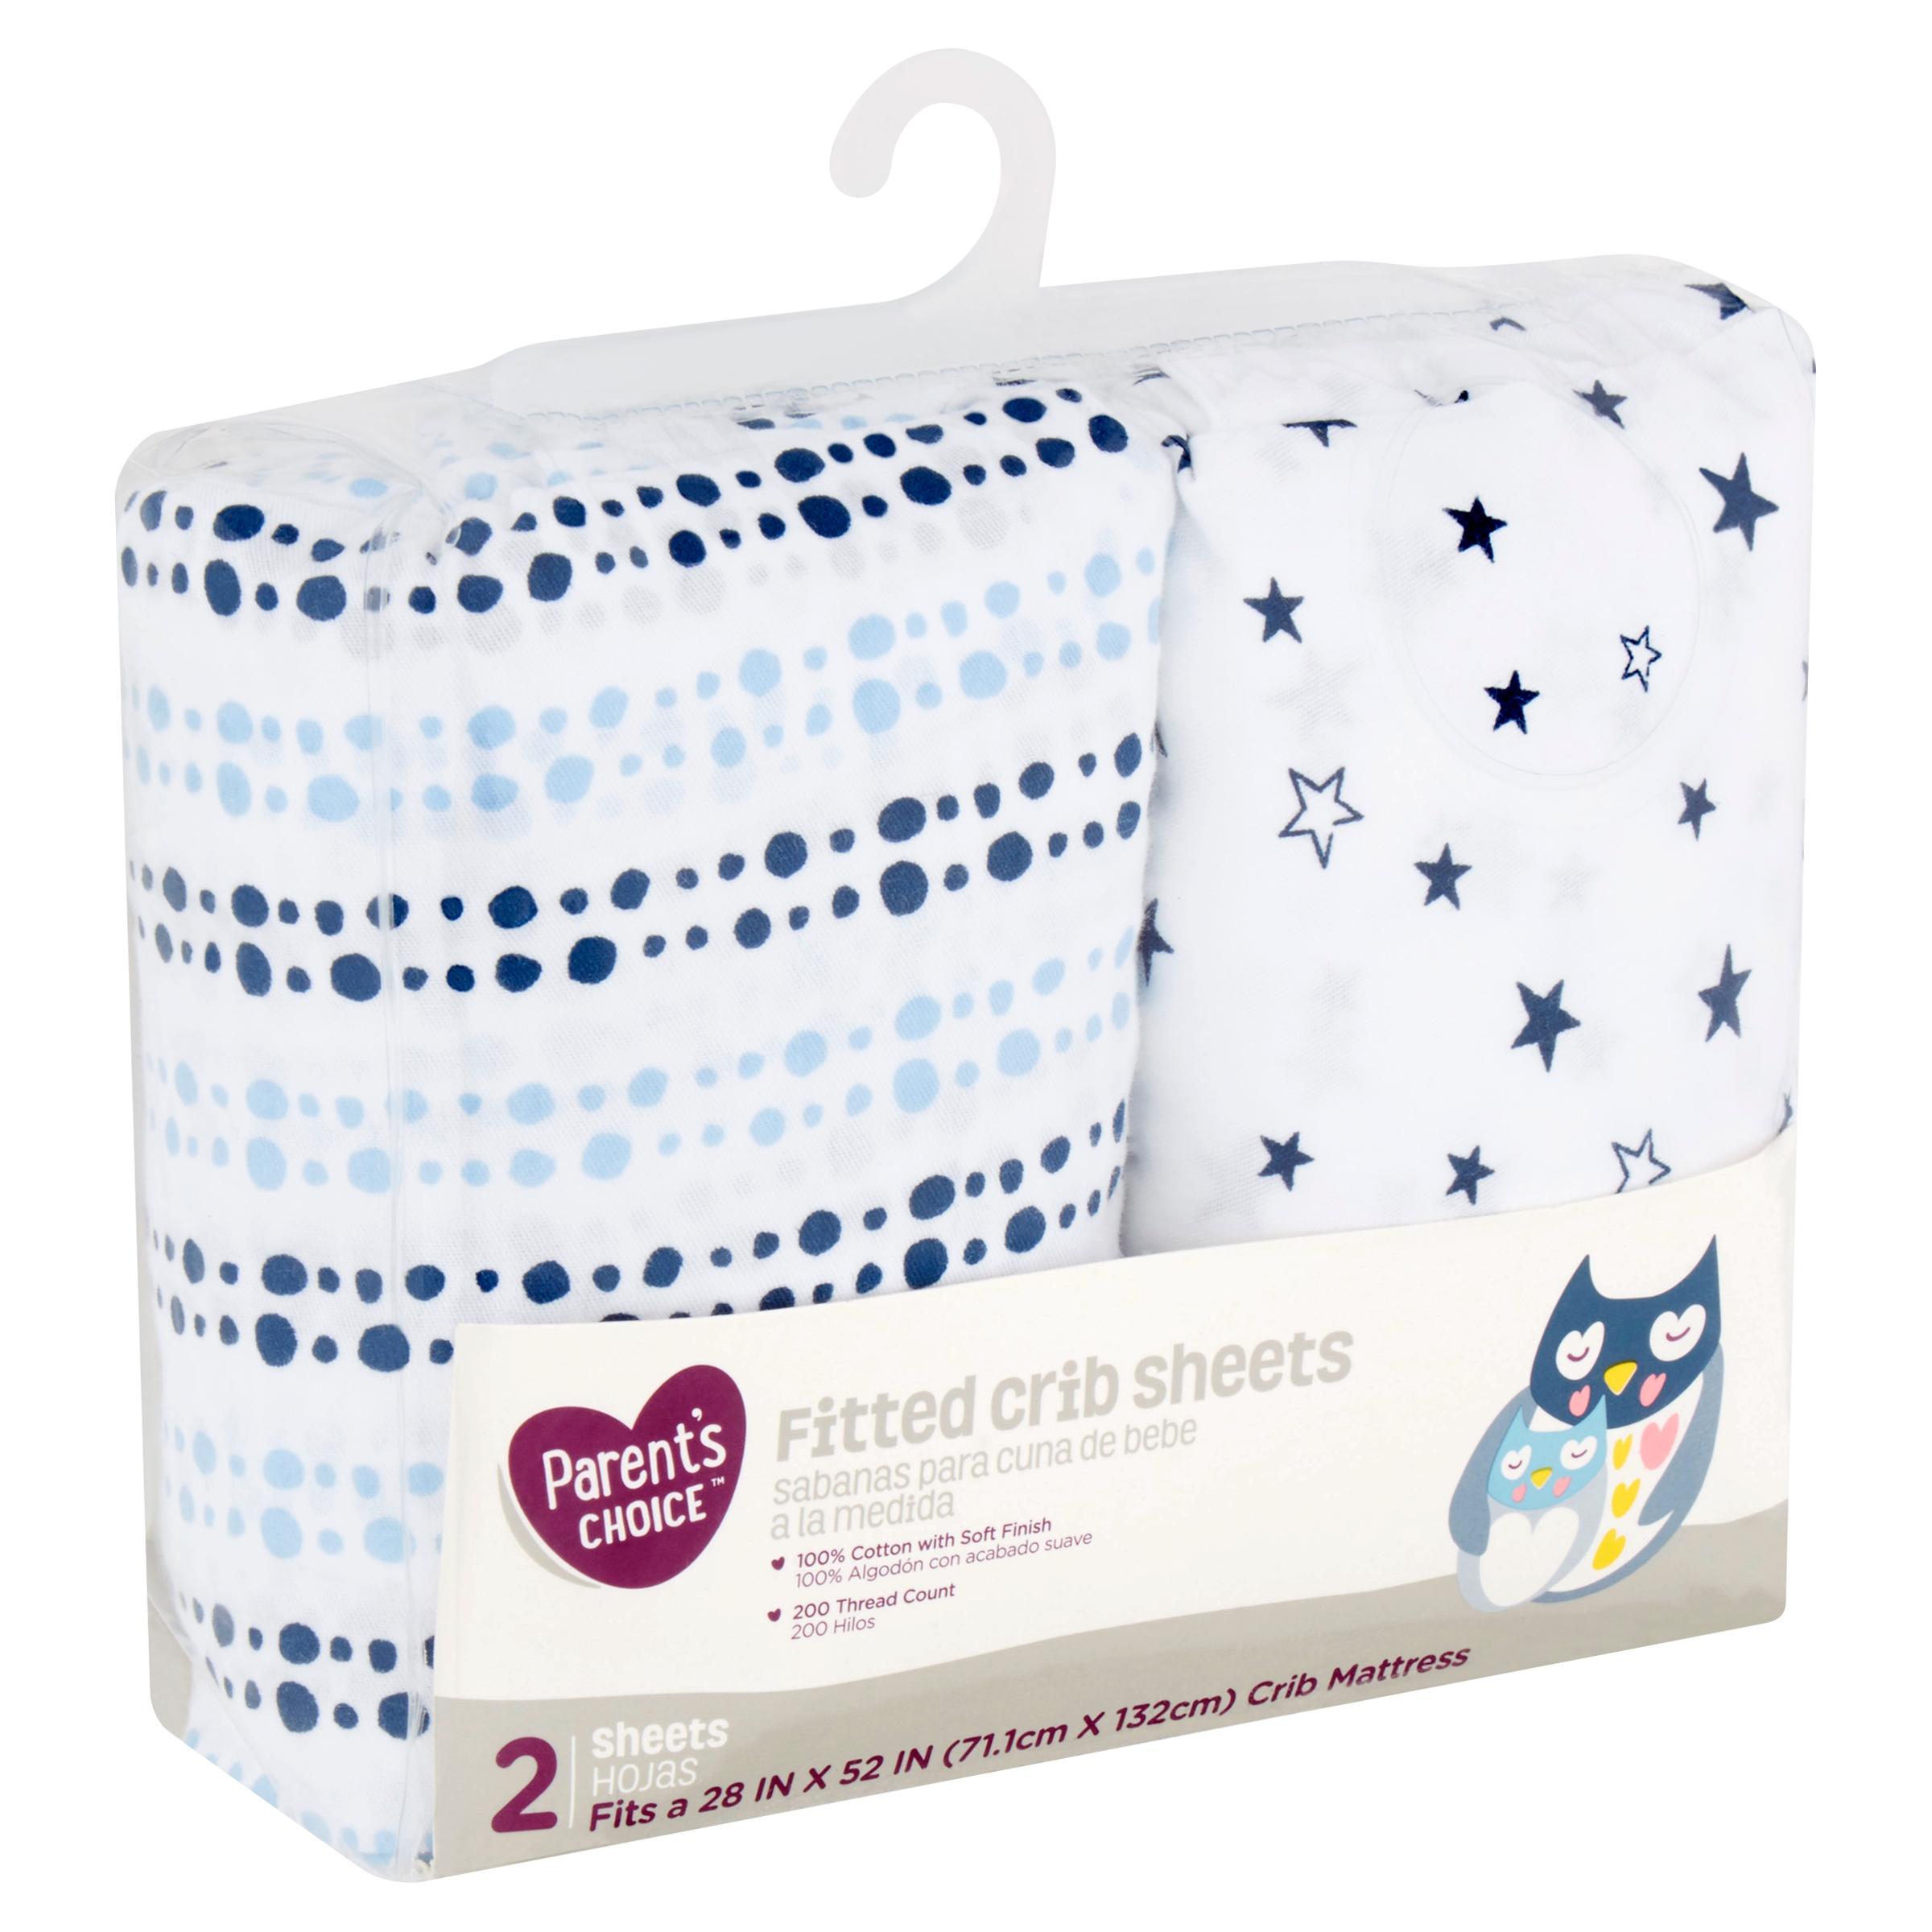 Parent's Choice 100% Cotton Fitted Crib Sheets, Blue Star 2pk - image 3 of 6